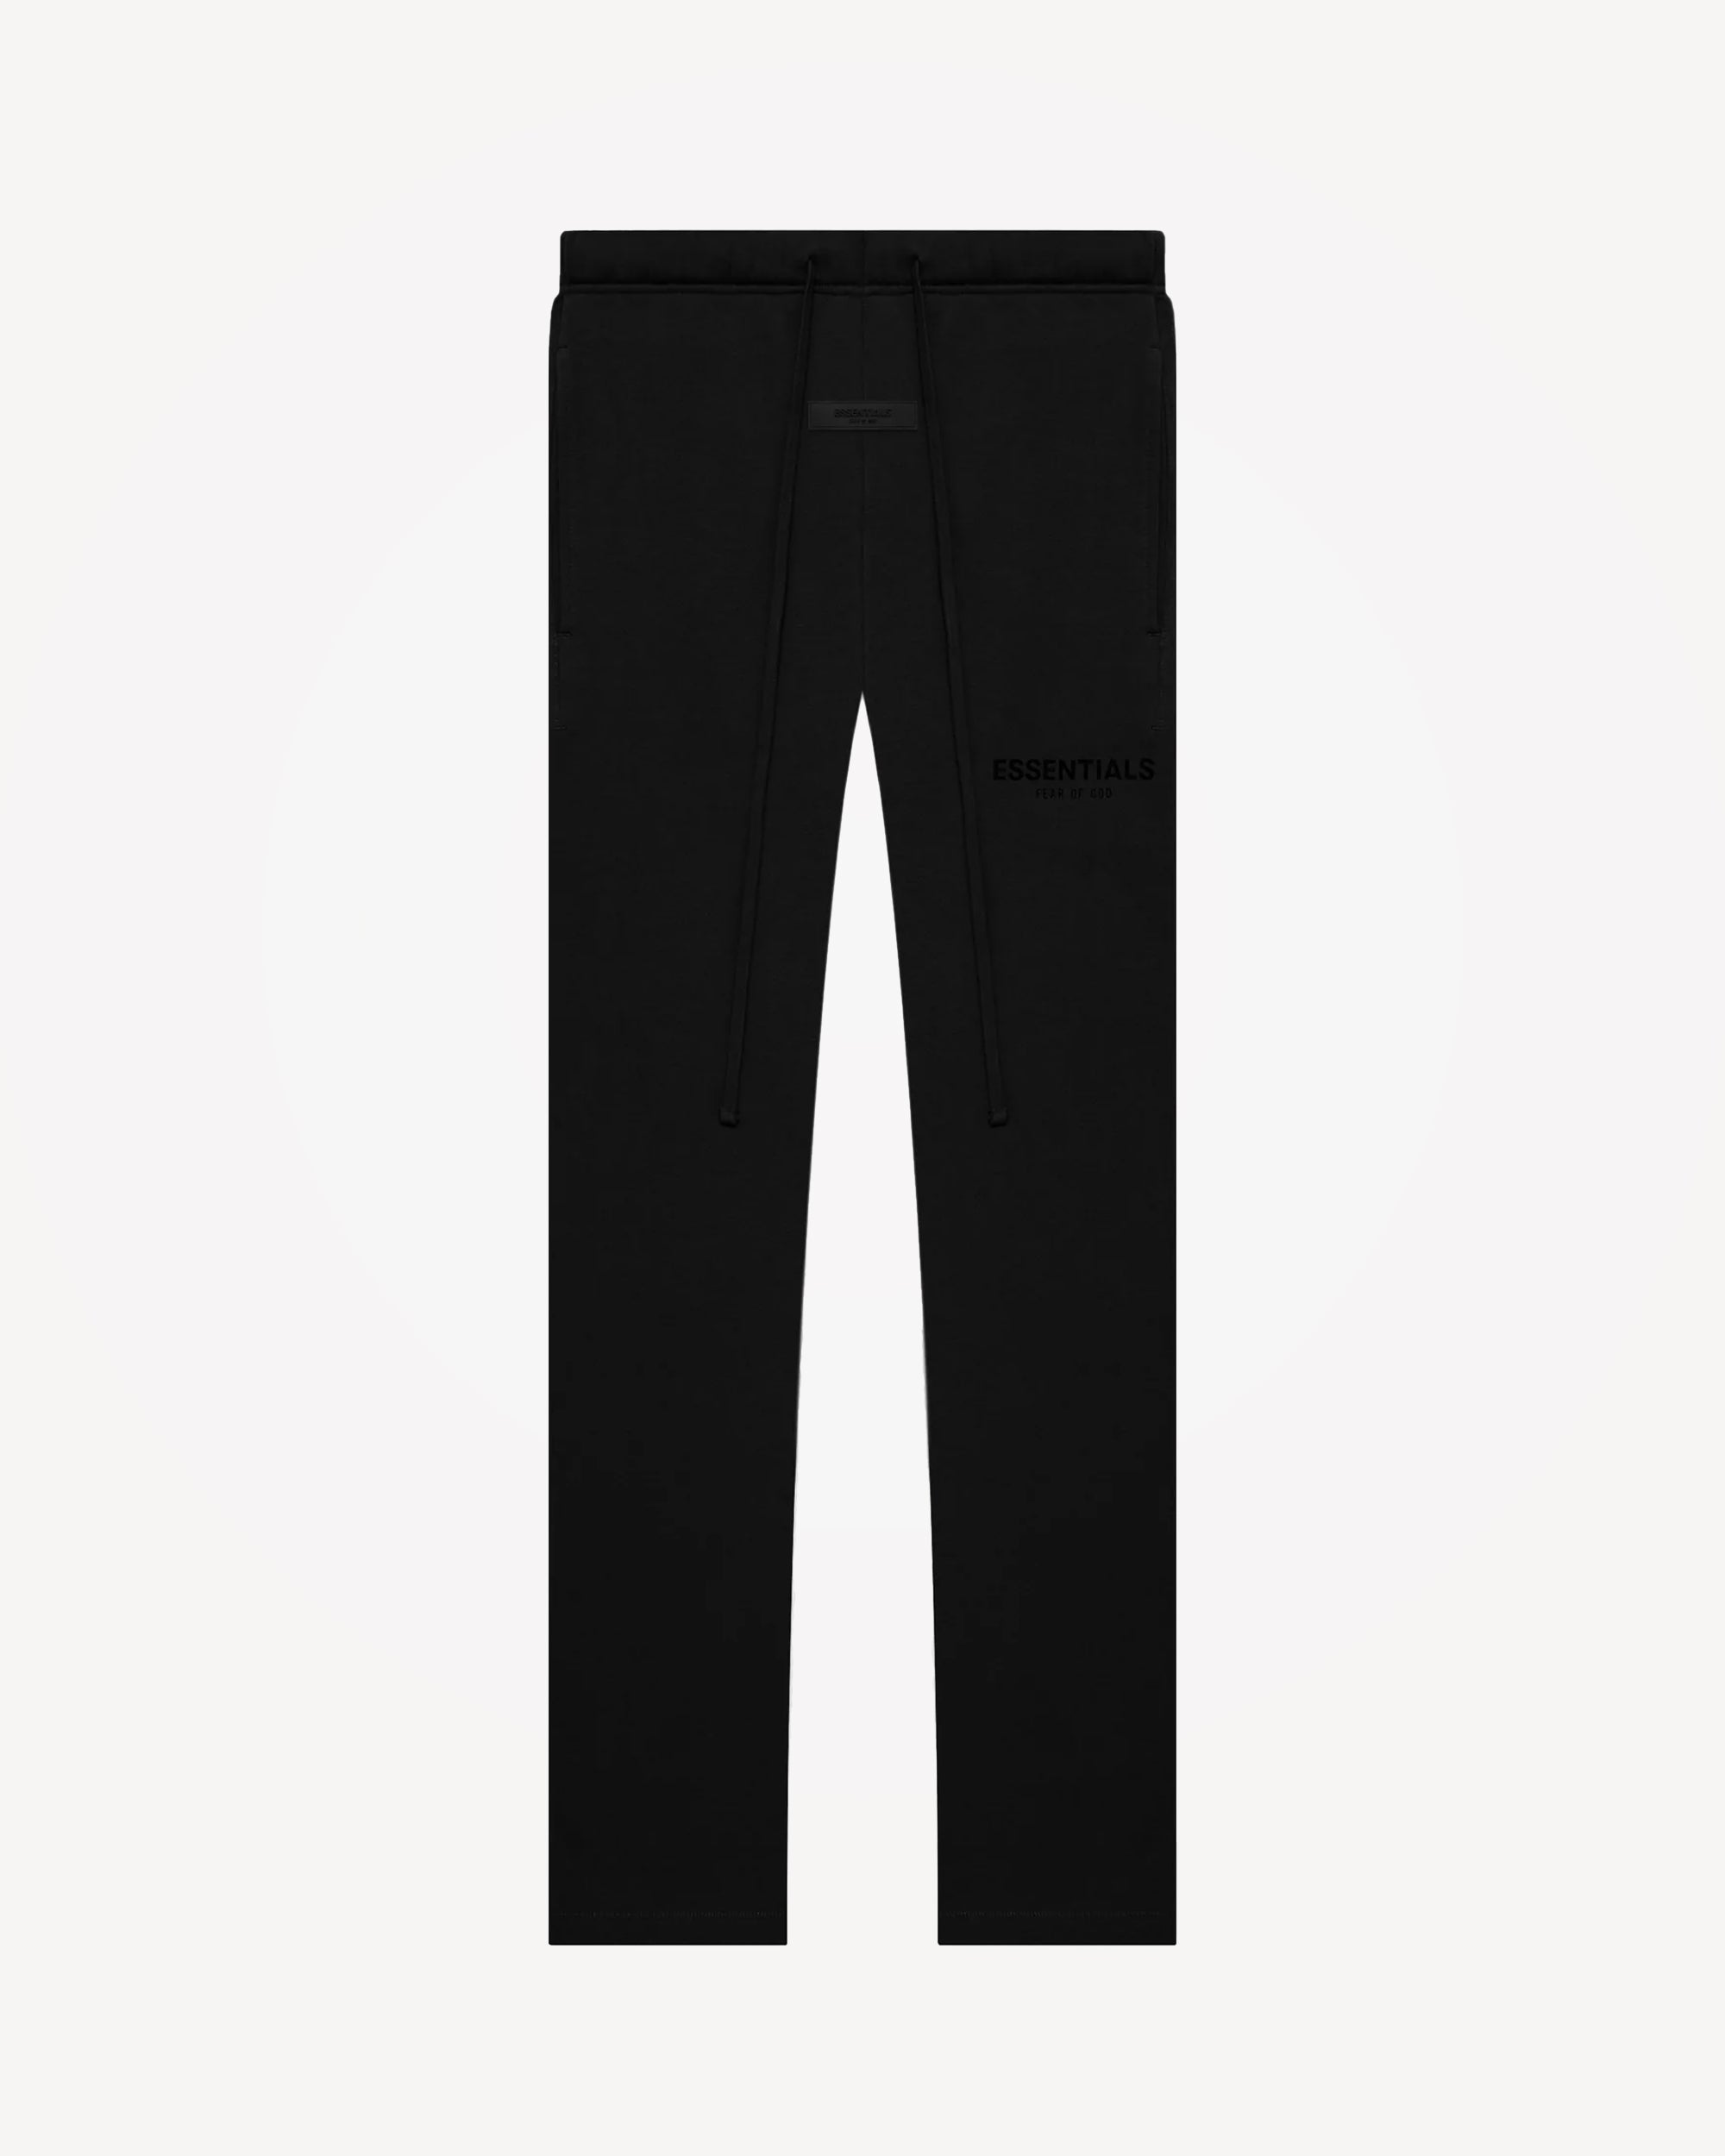 Men's Relaxed Sweatpant in Black